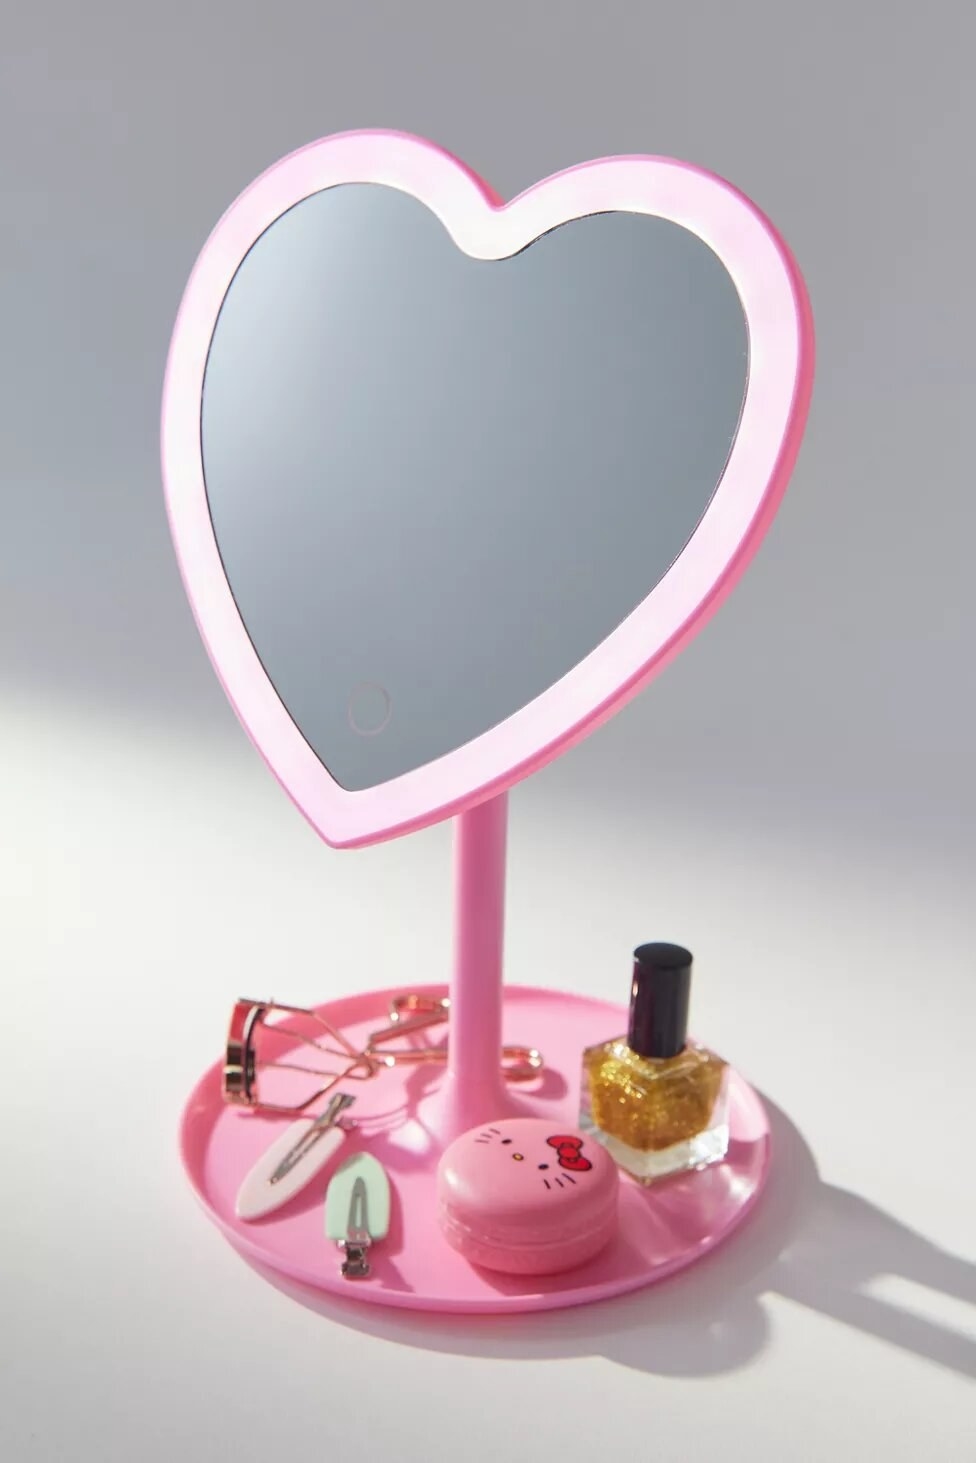 the mirror with accessories in the tray